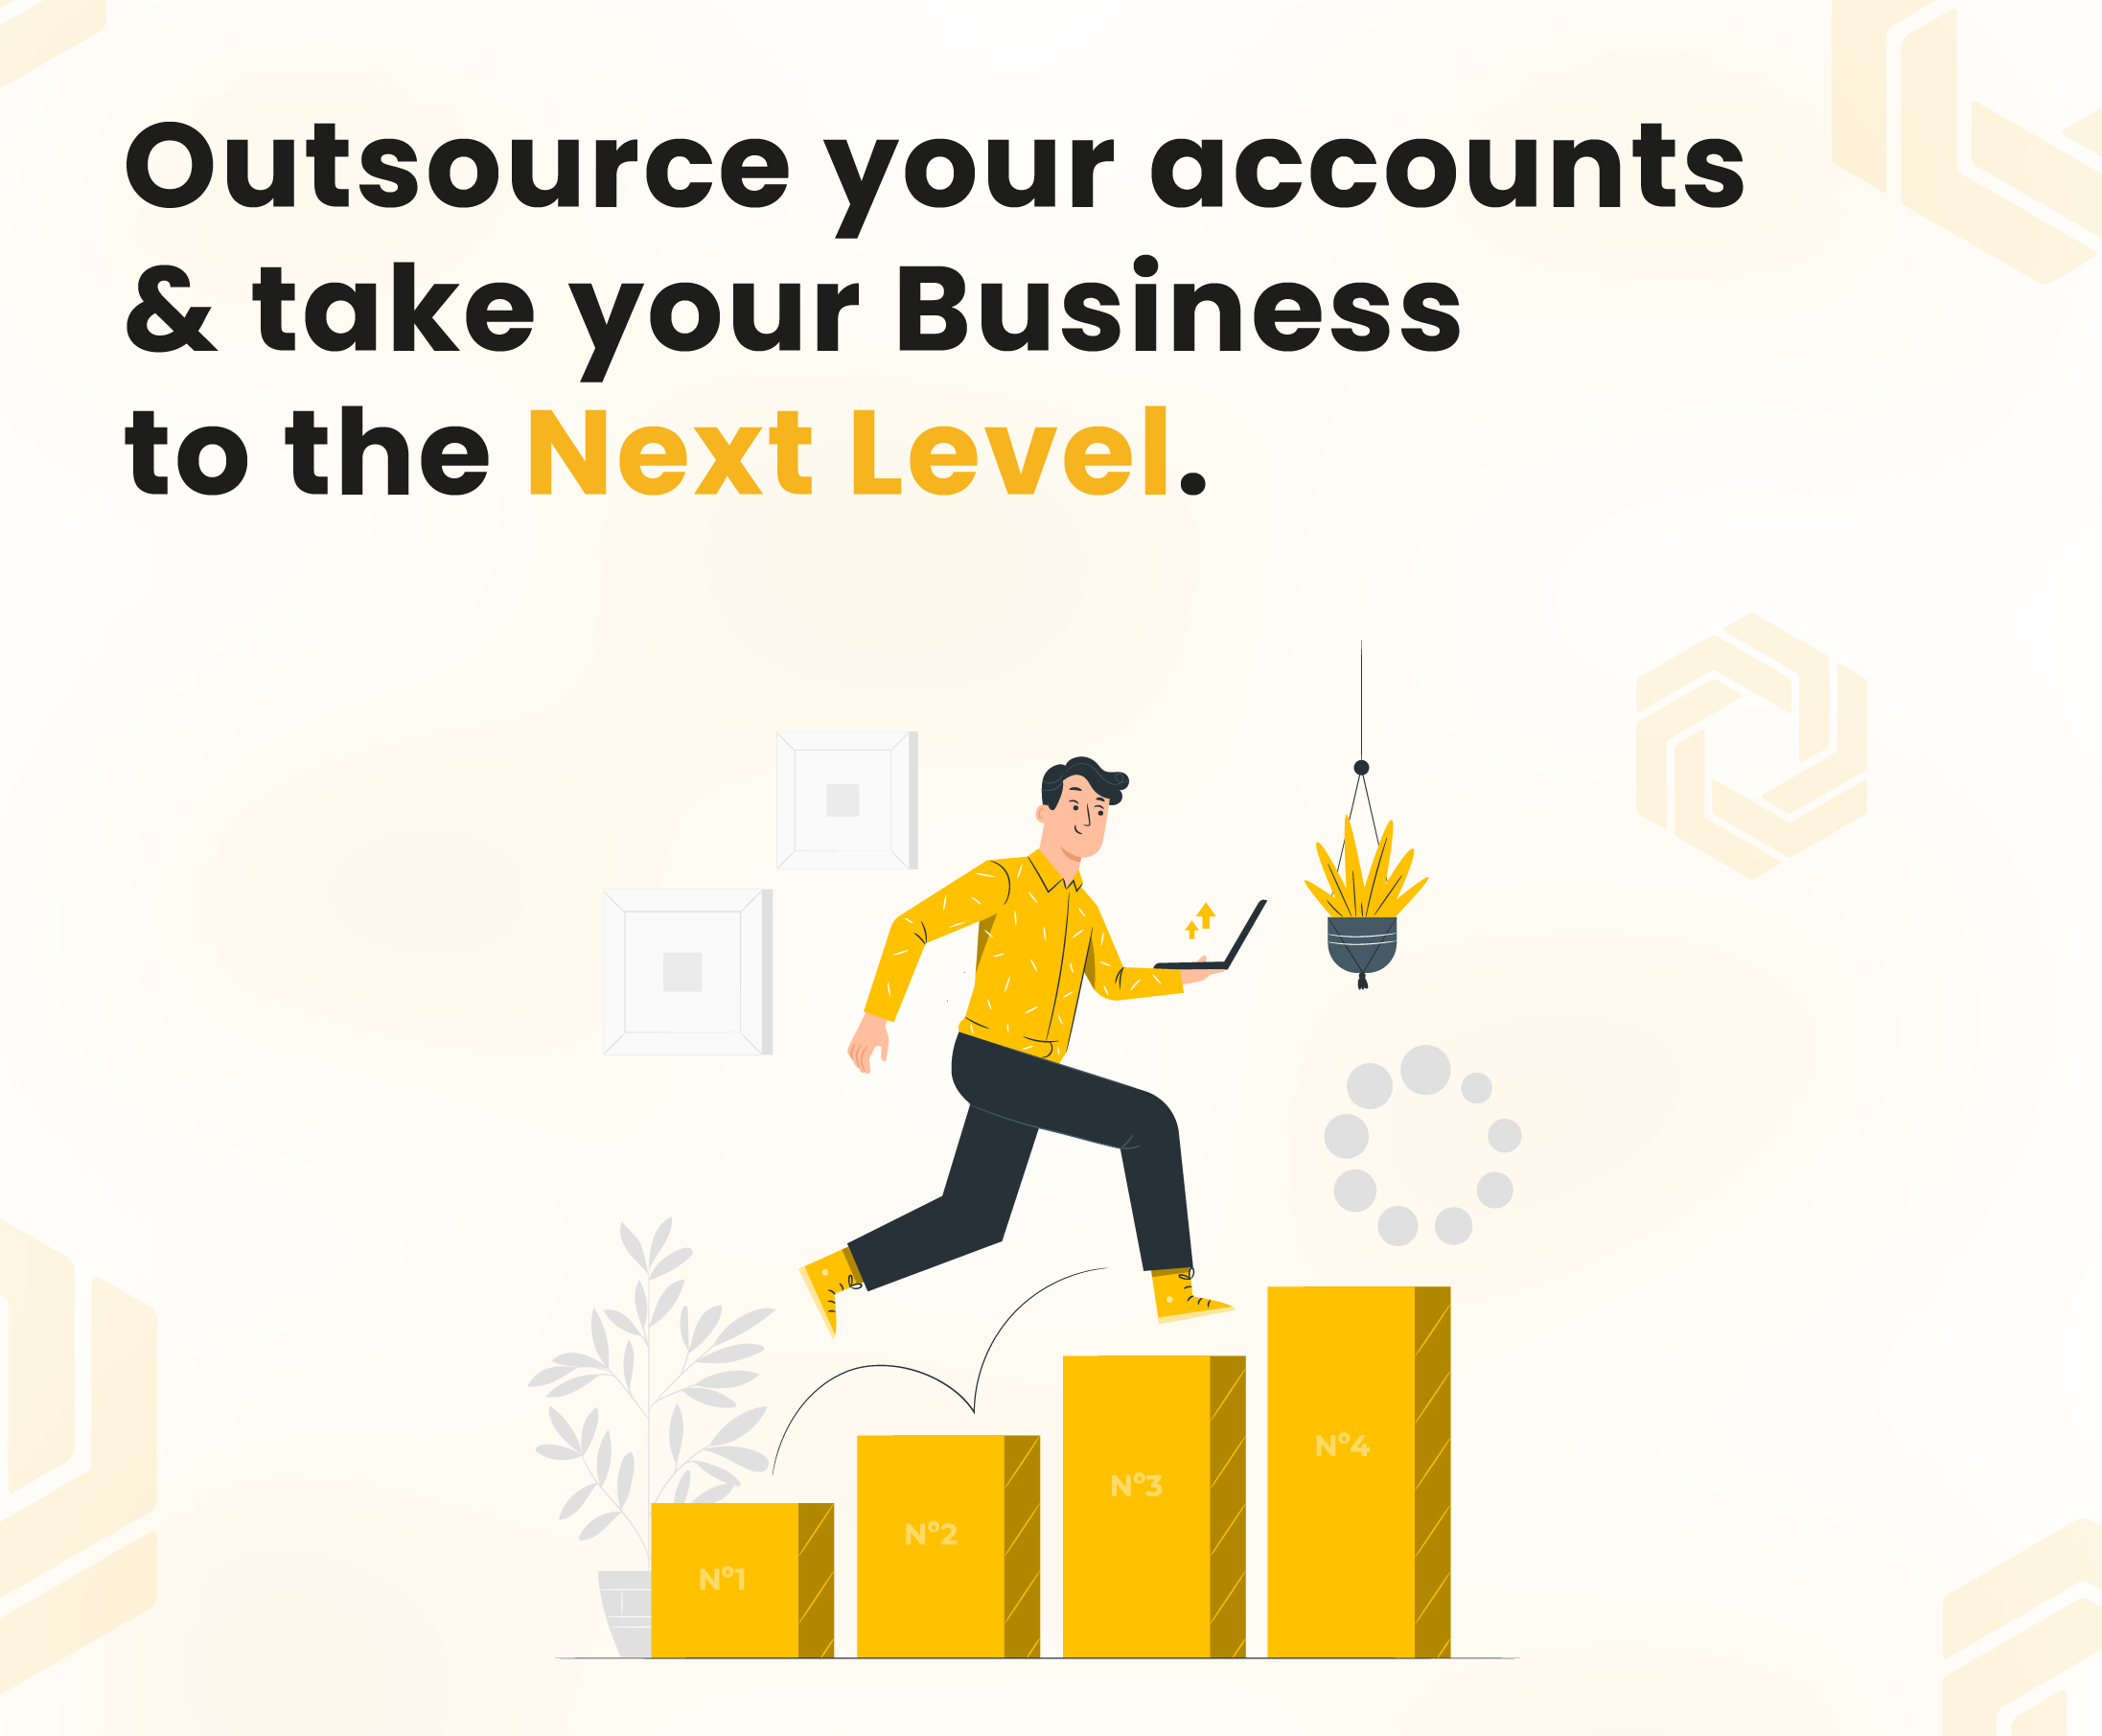 Outsource your accounts & take your business to the Next Level.